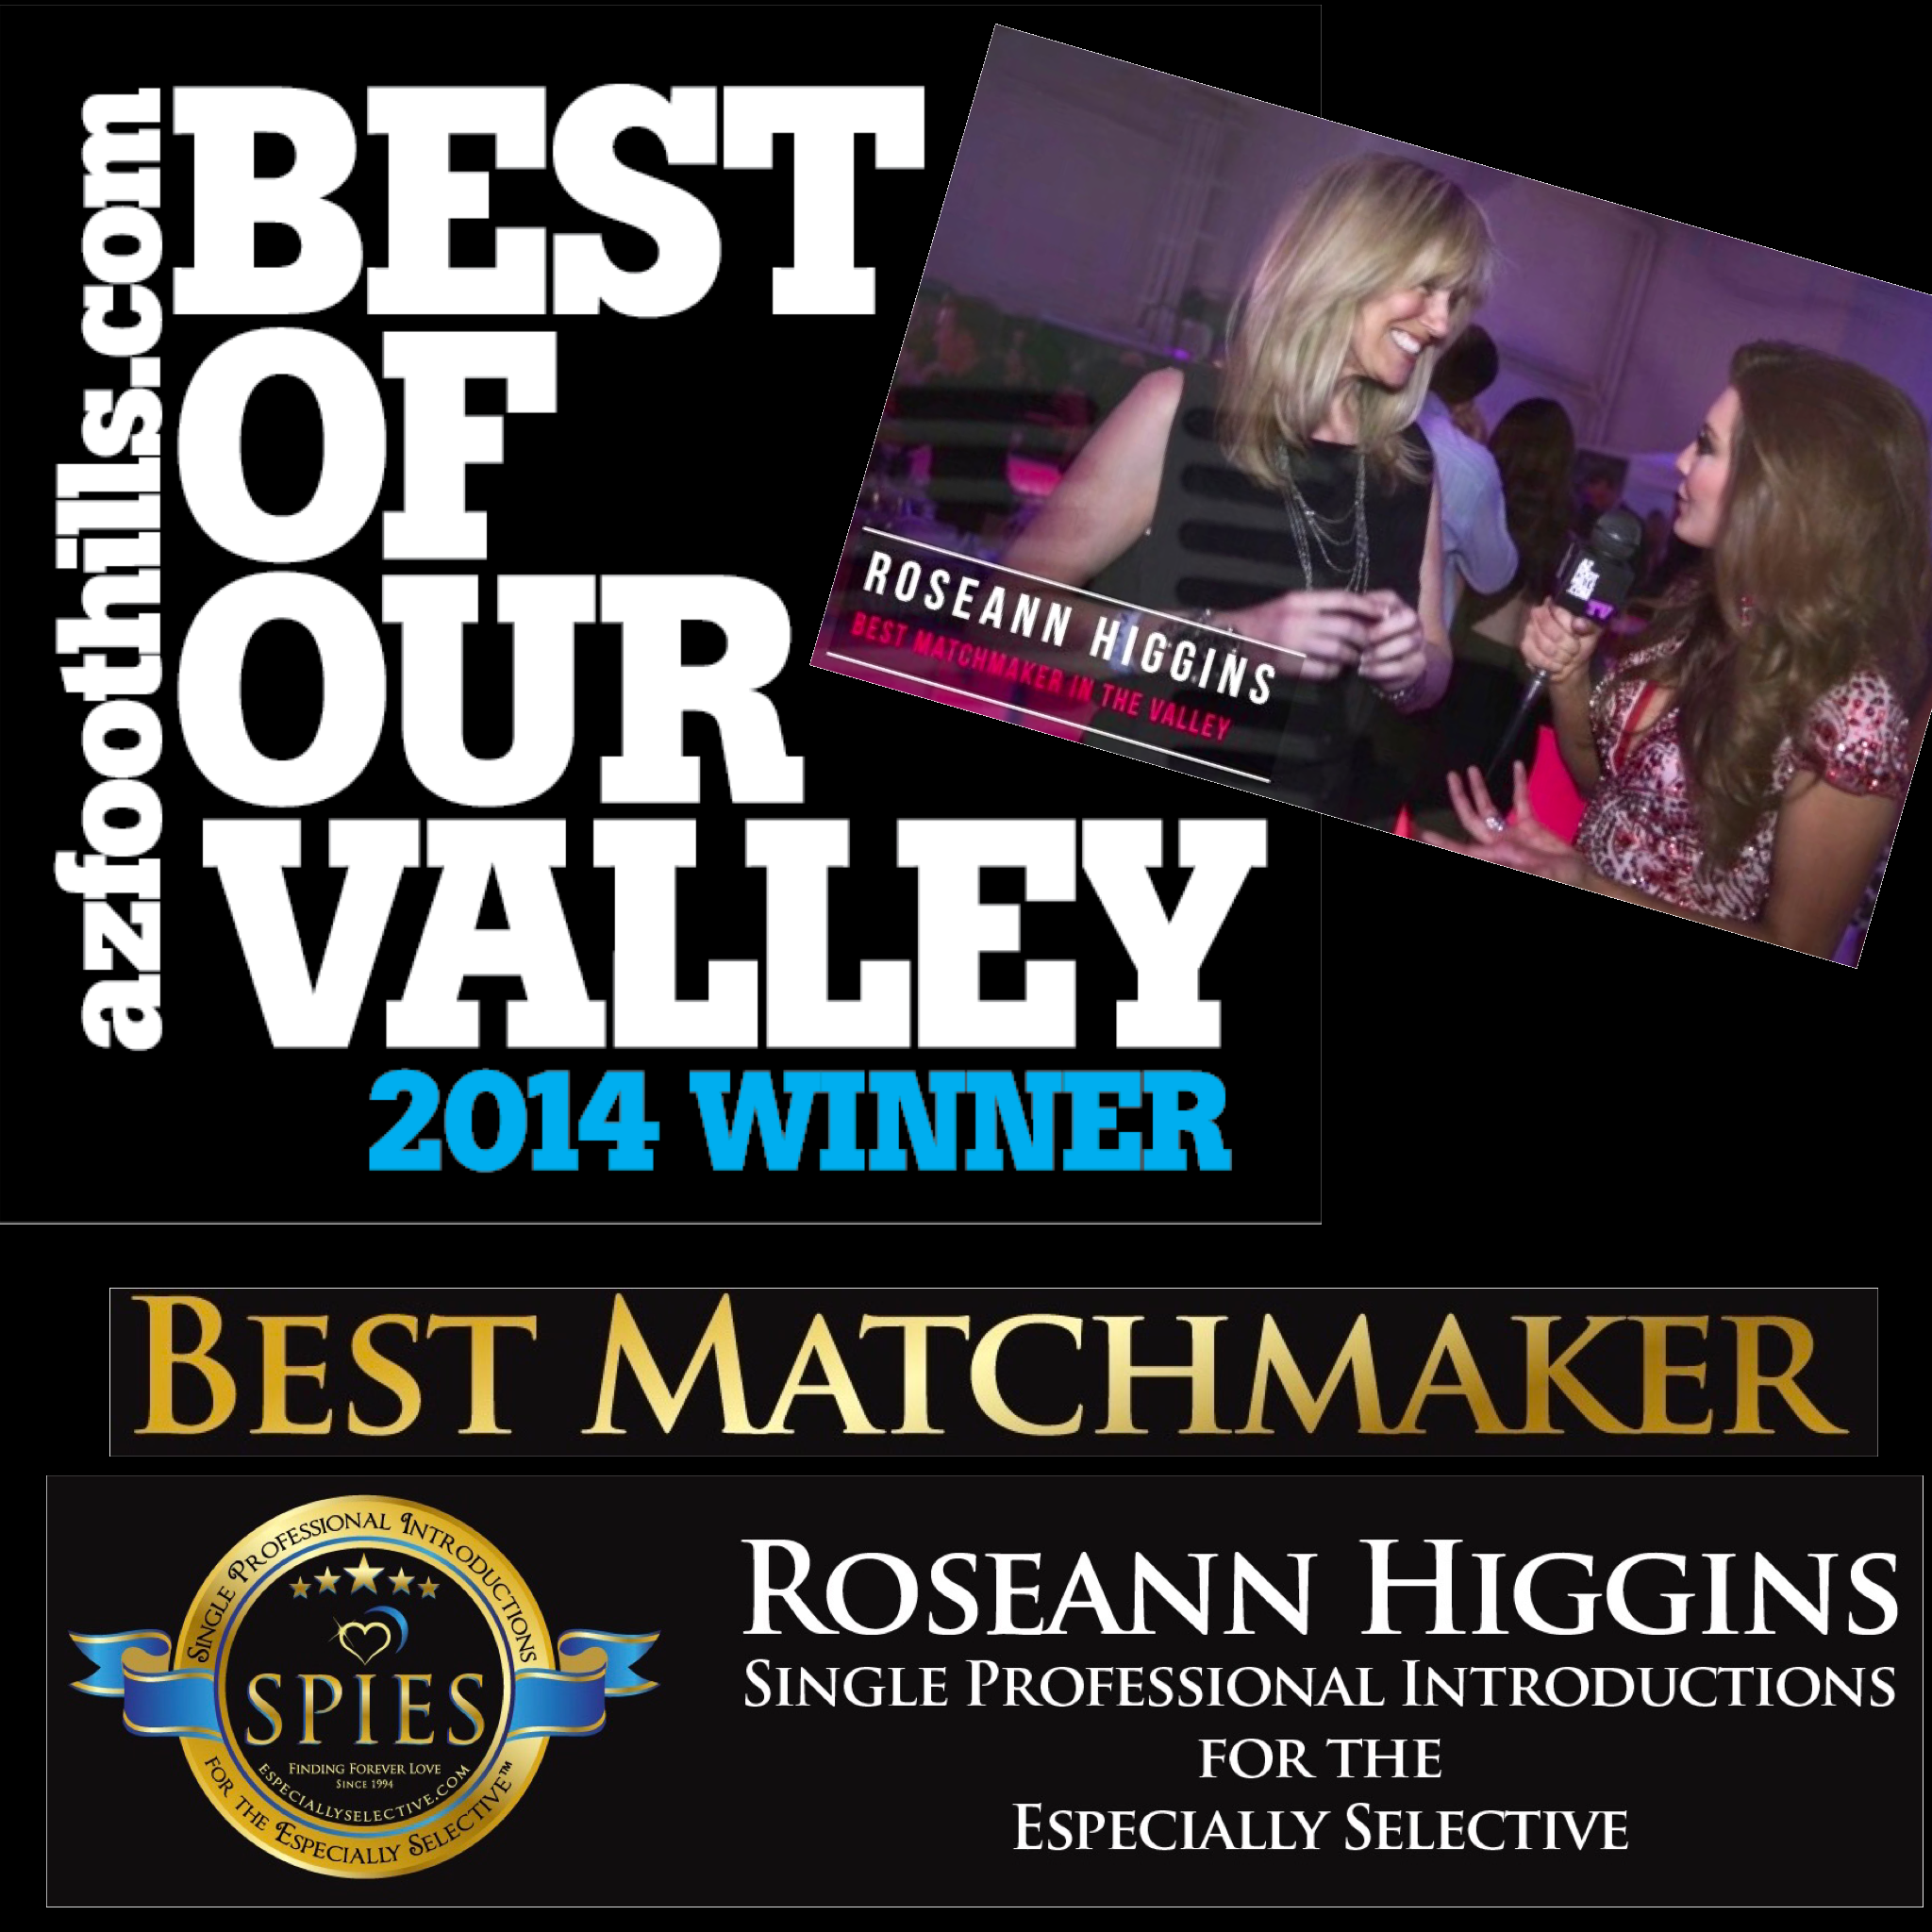 Best Matchmaker, Best of Our Valley, Roseann Higgins, SPIES, Single Professional Introductions for the Especially Selective, Phoenix, Scottsdale, AZFoothills, AZ Foothills Magazine, Arizona, matchmaking service, single men, single women, looking for love, especiallyselective.com, singles, millionaire matchmaker, elite matchmaker,